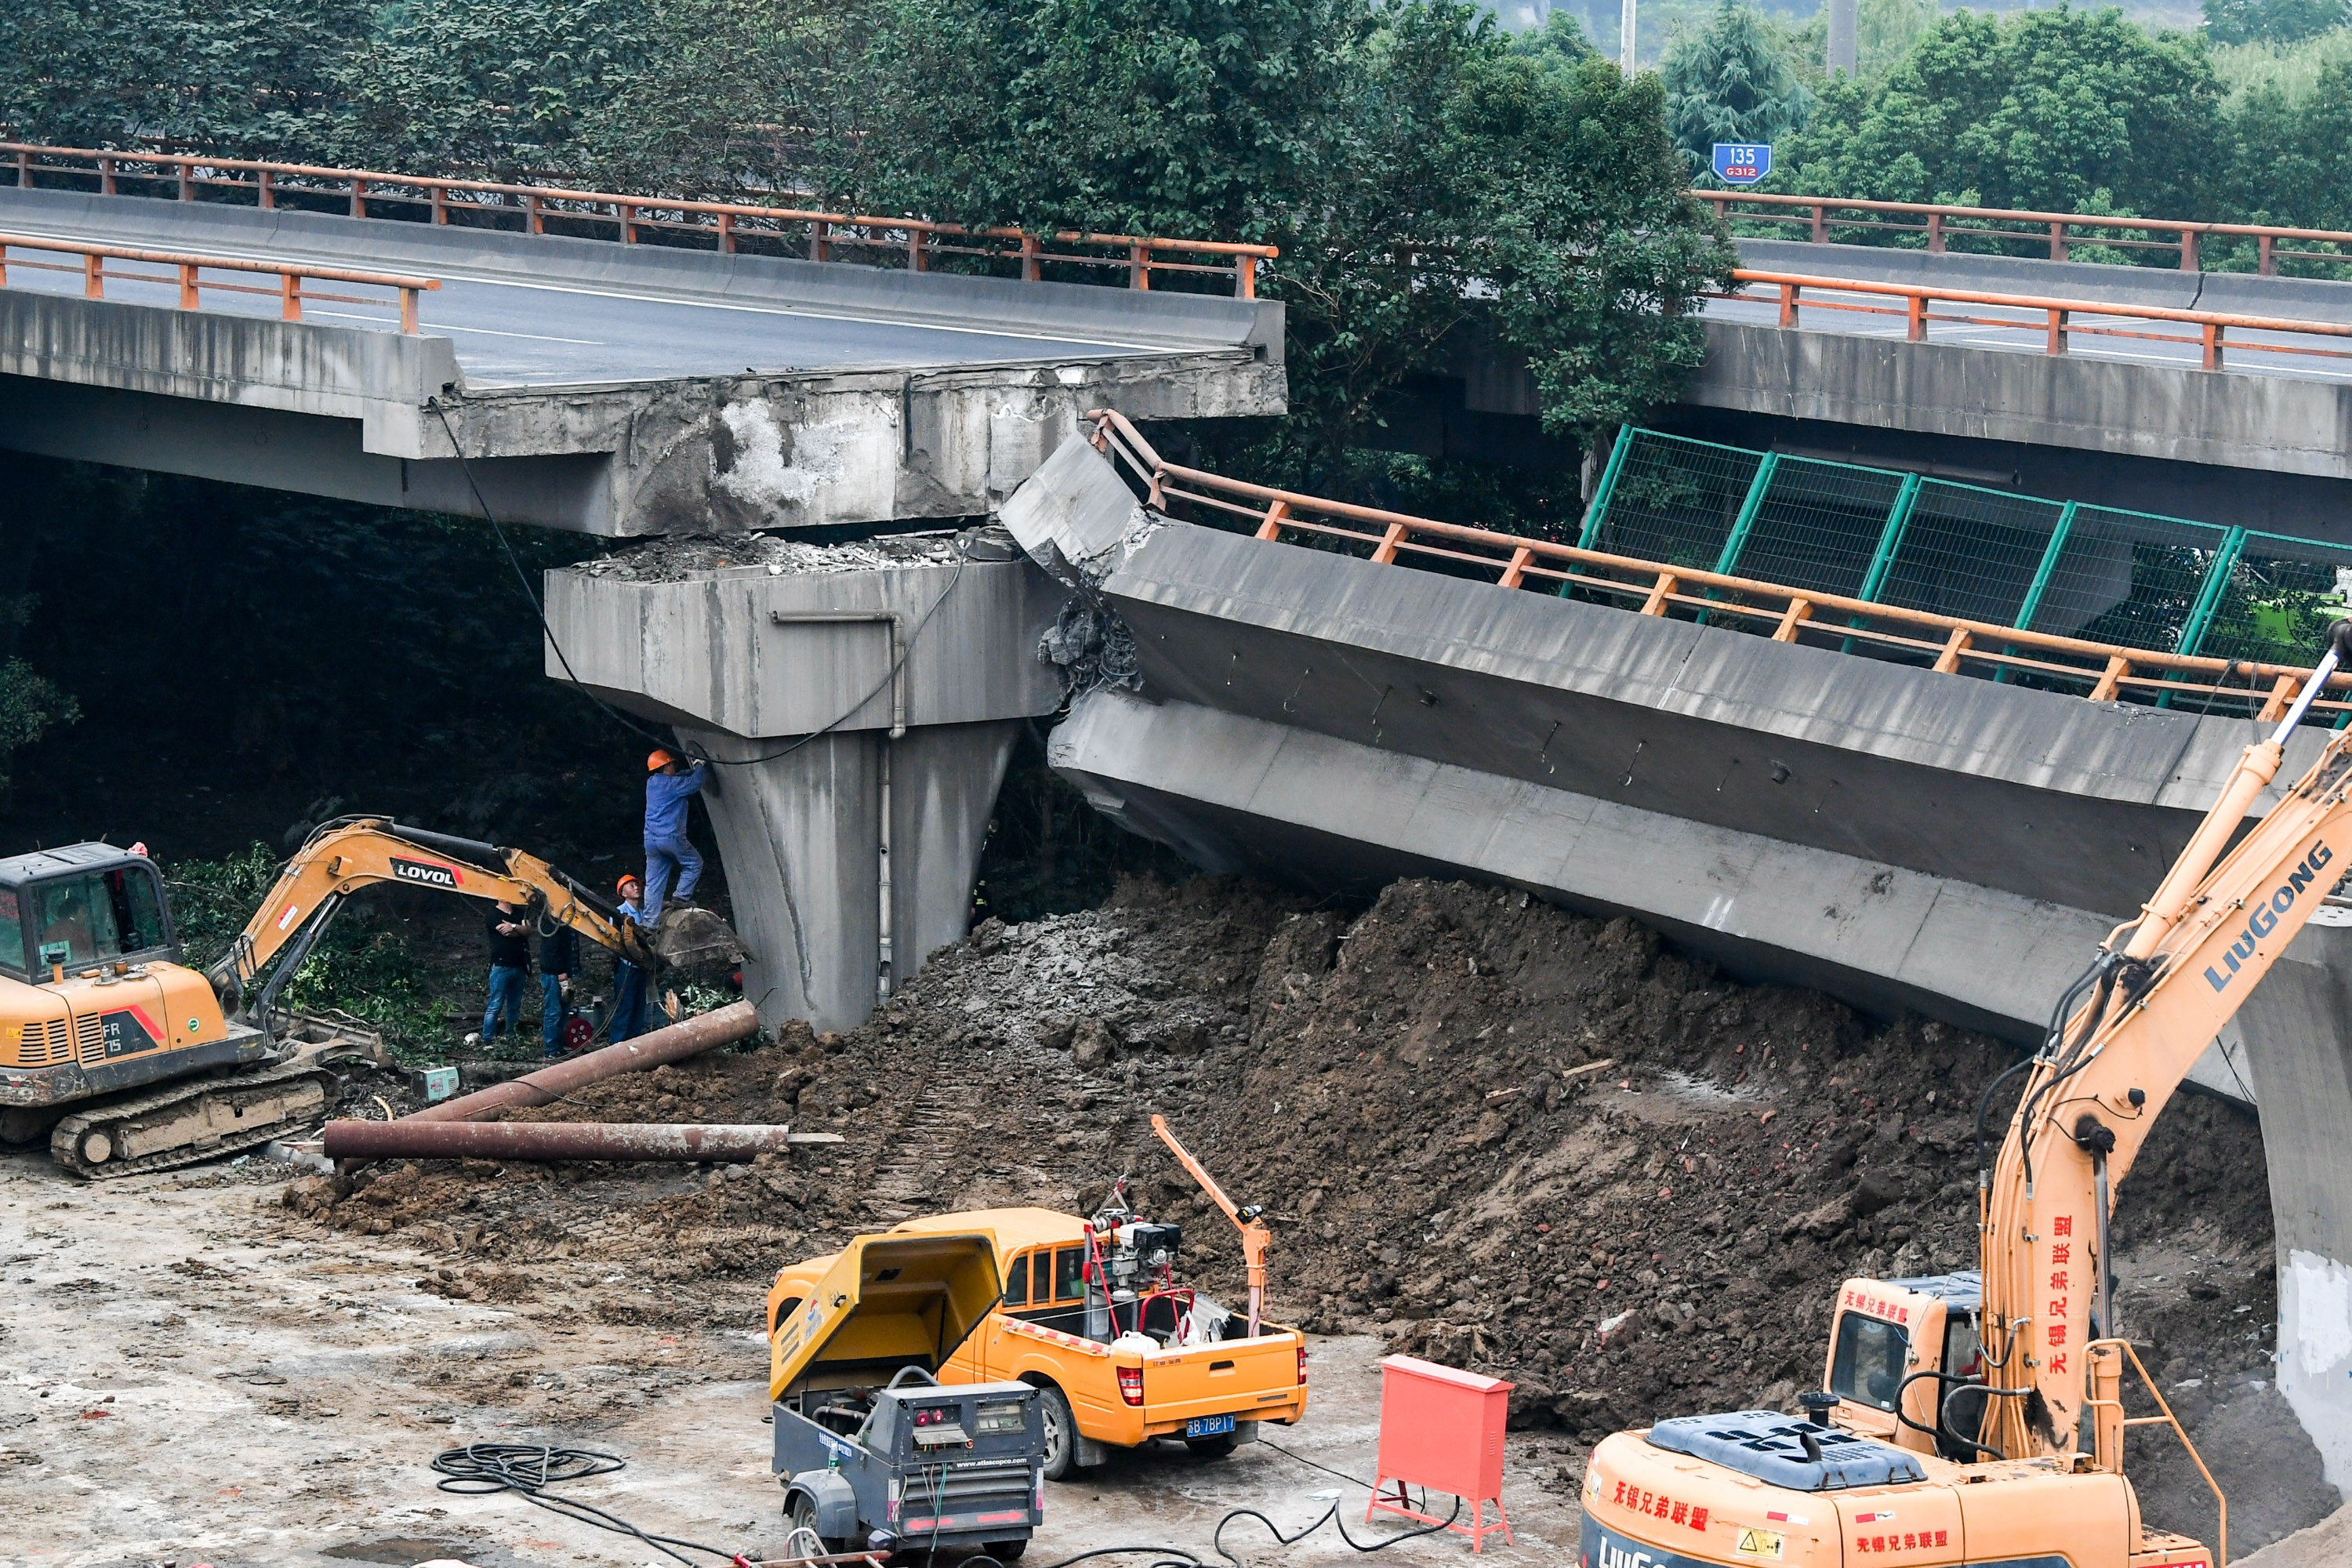 Rescuers work to remove rubble at the site of a flyover collapse in Wuxi, Jiangsu province, on Friday. Photo: Xinhua